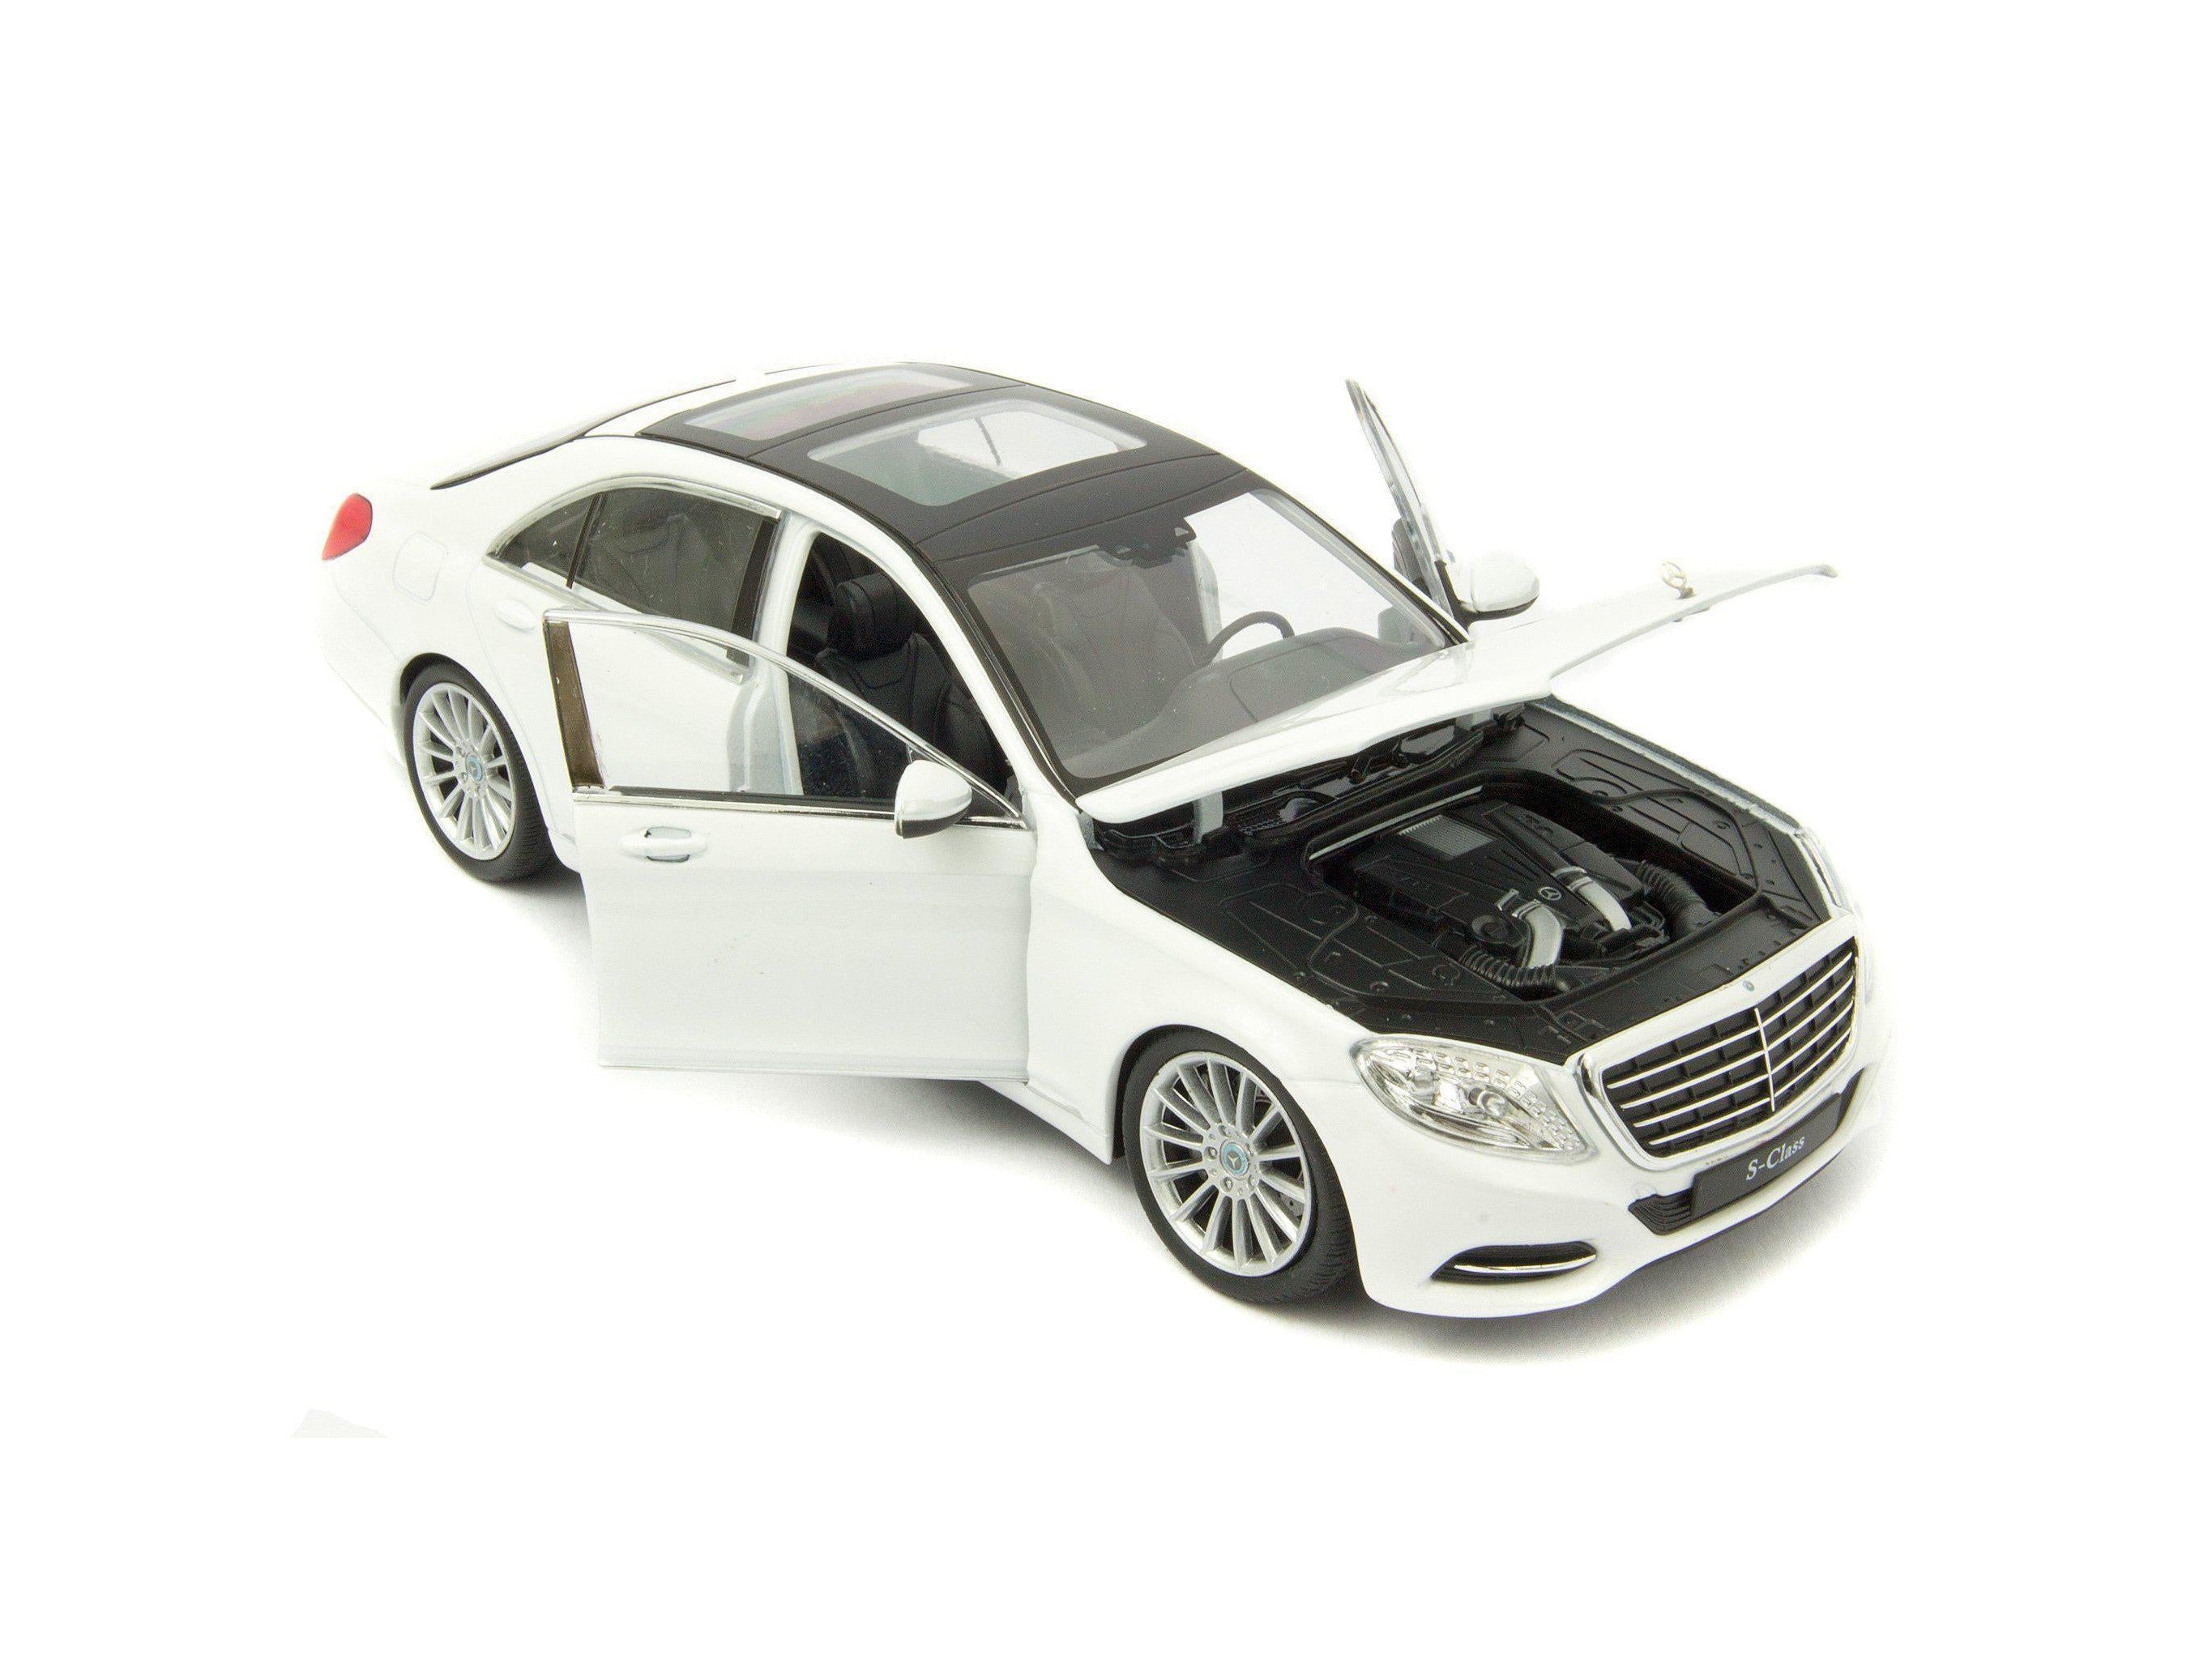 Mercedes-Benz S-Class (W222) 2013 white - 1:24 scale Diecast Model Car-Welly-Diecast Model Centre